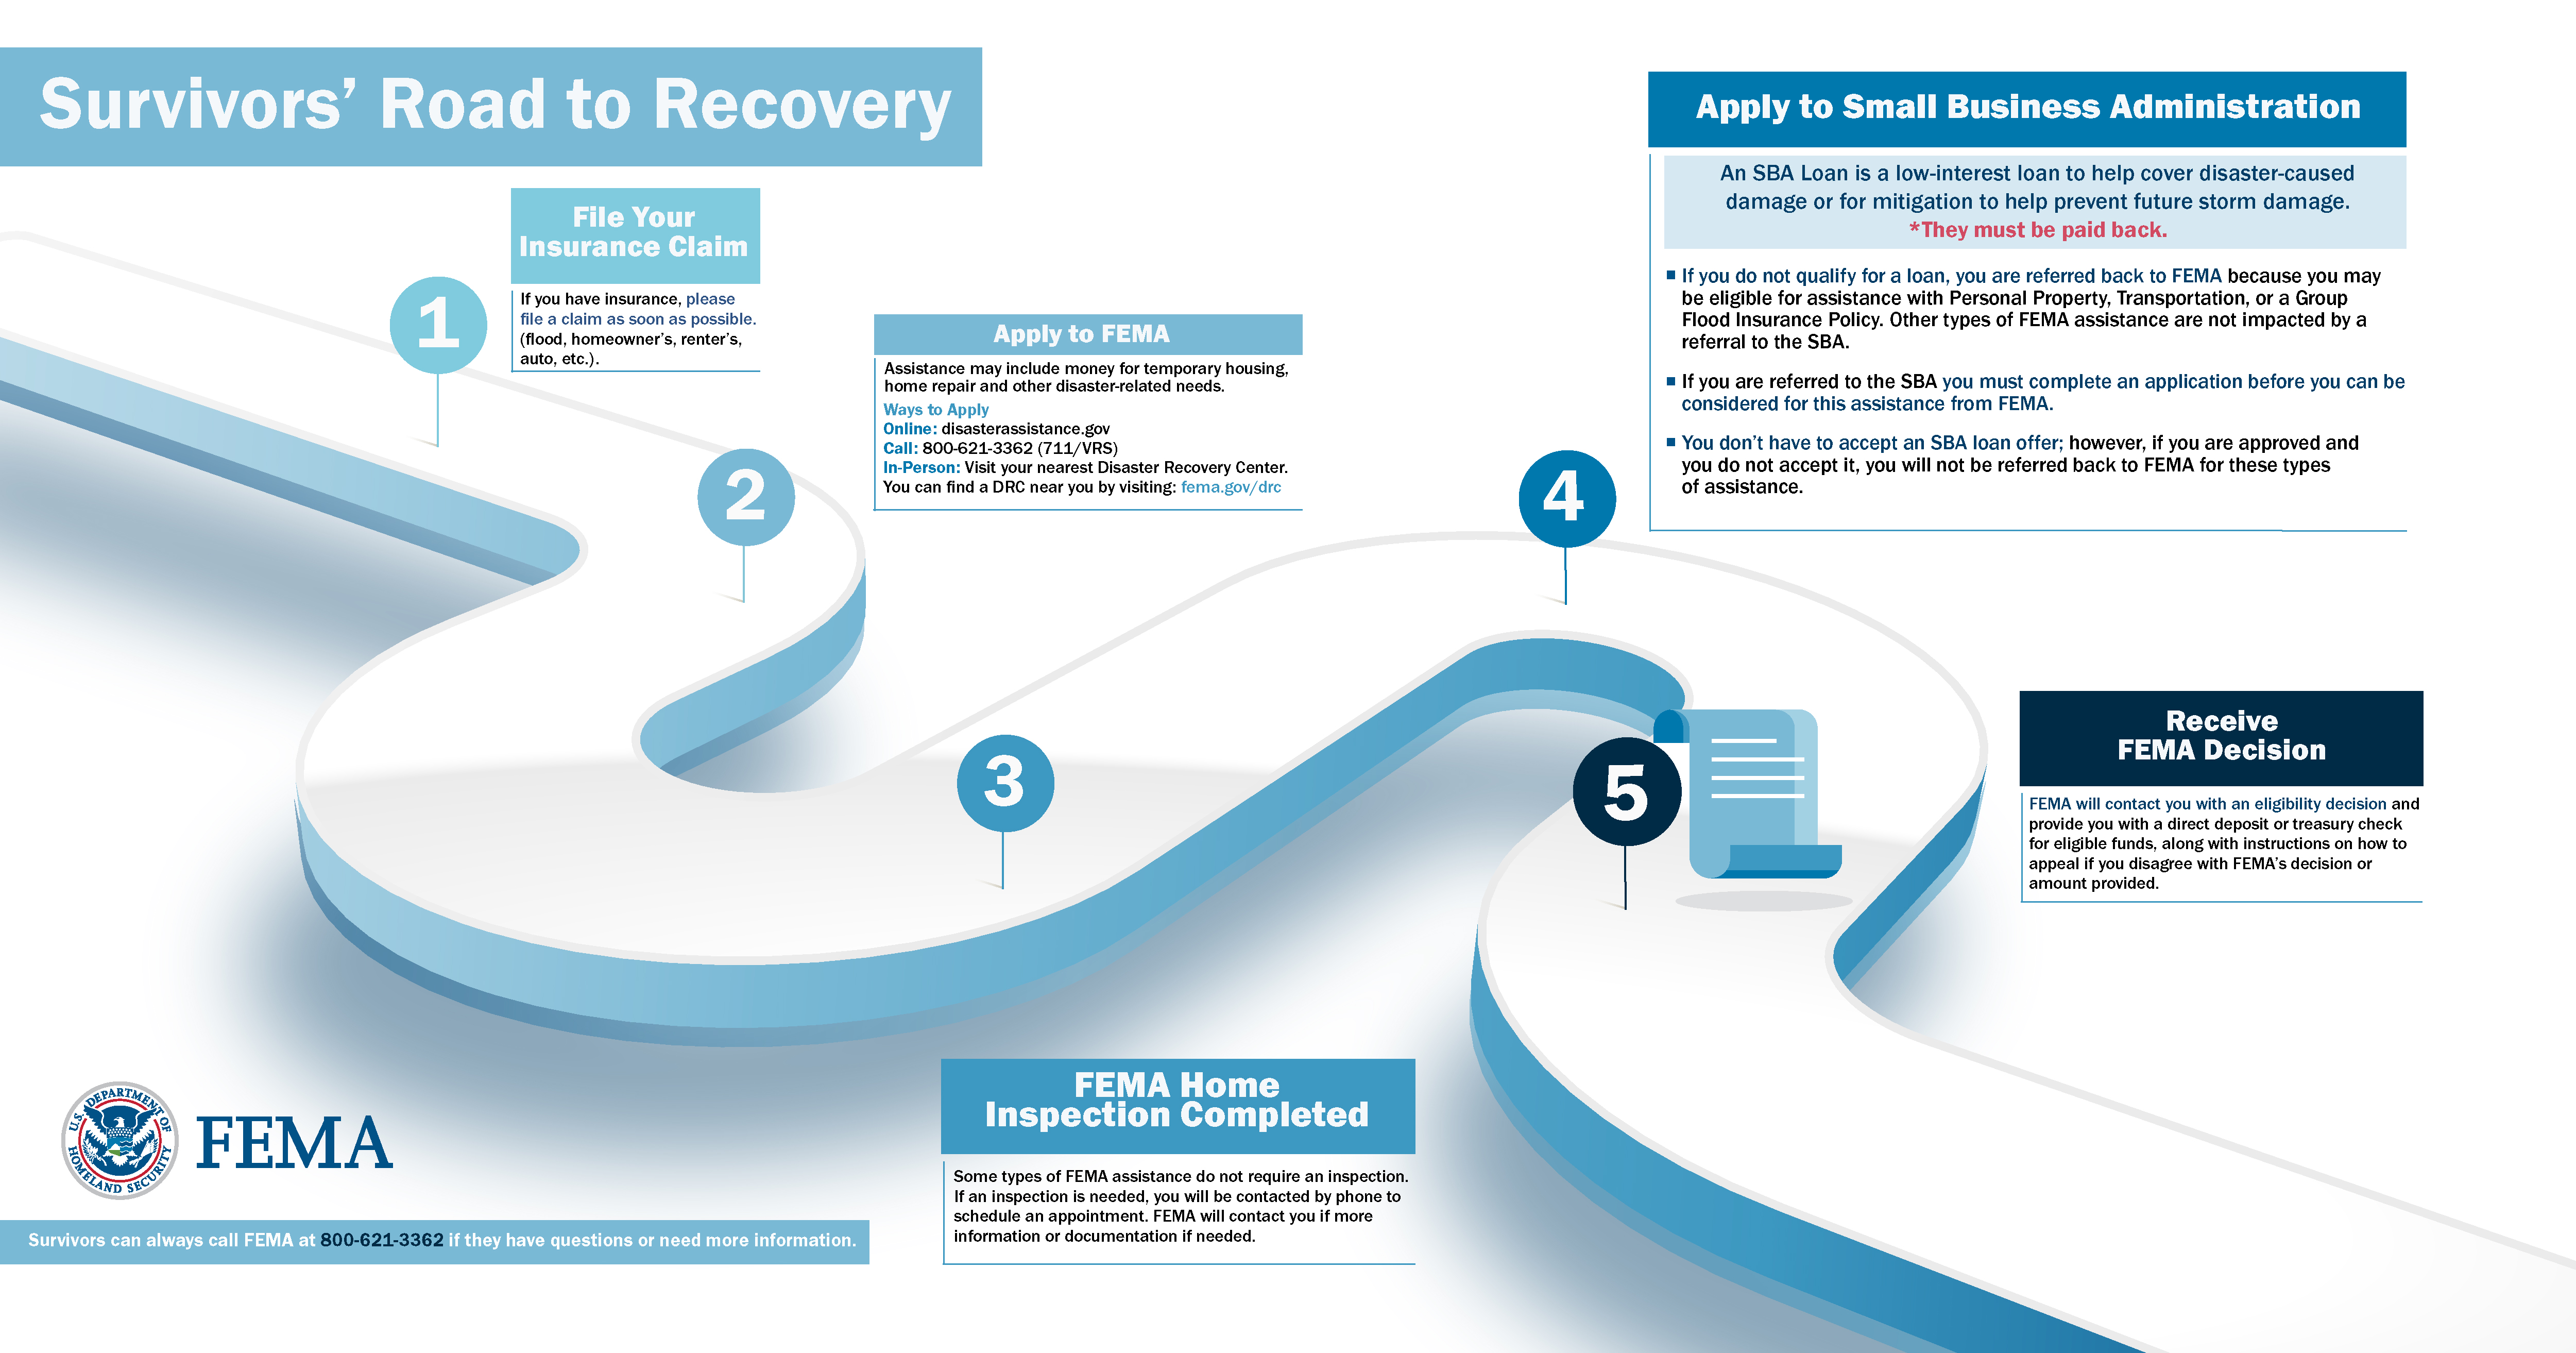 Survivors’ Road to Recovery Graphic